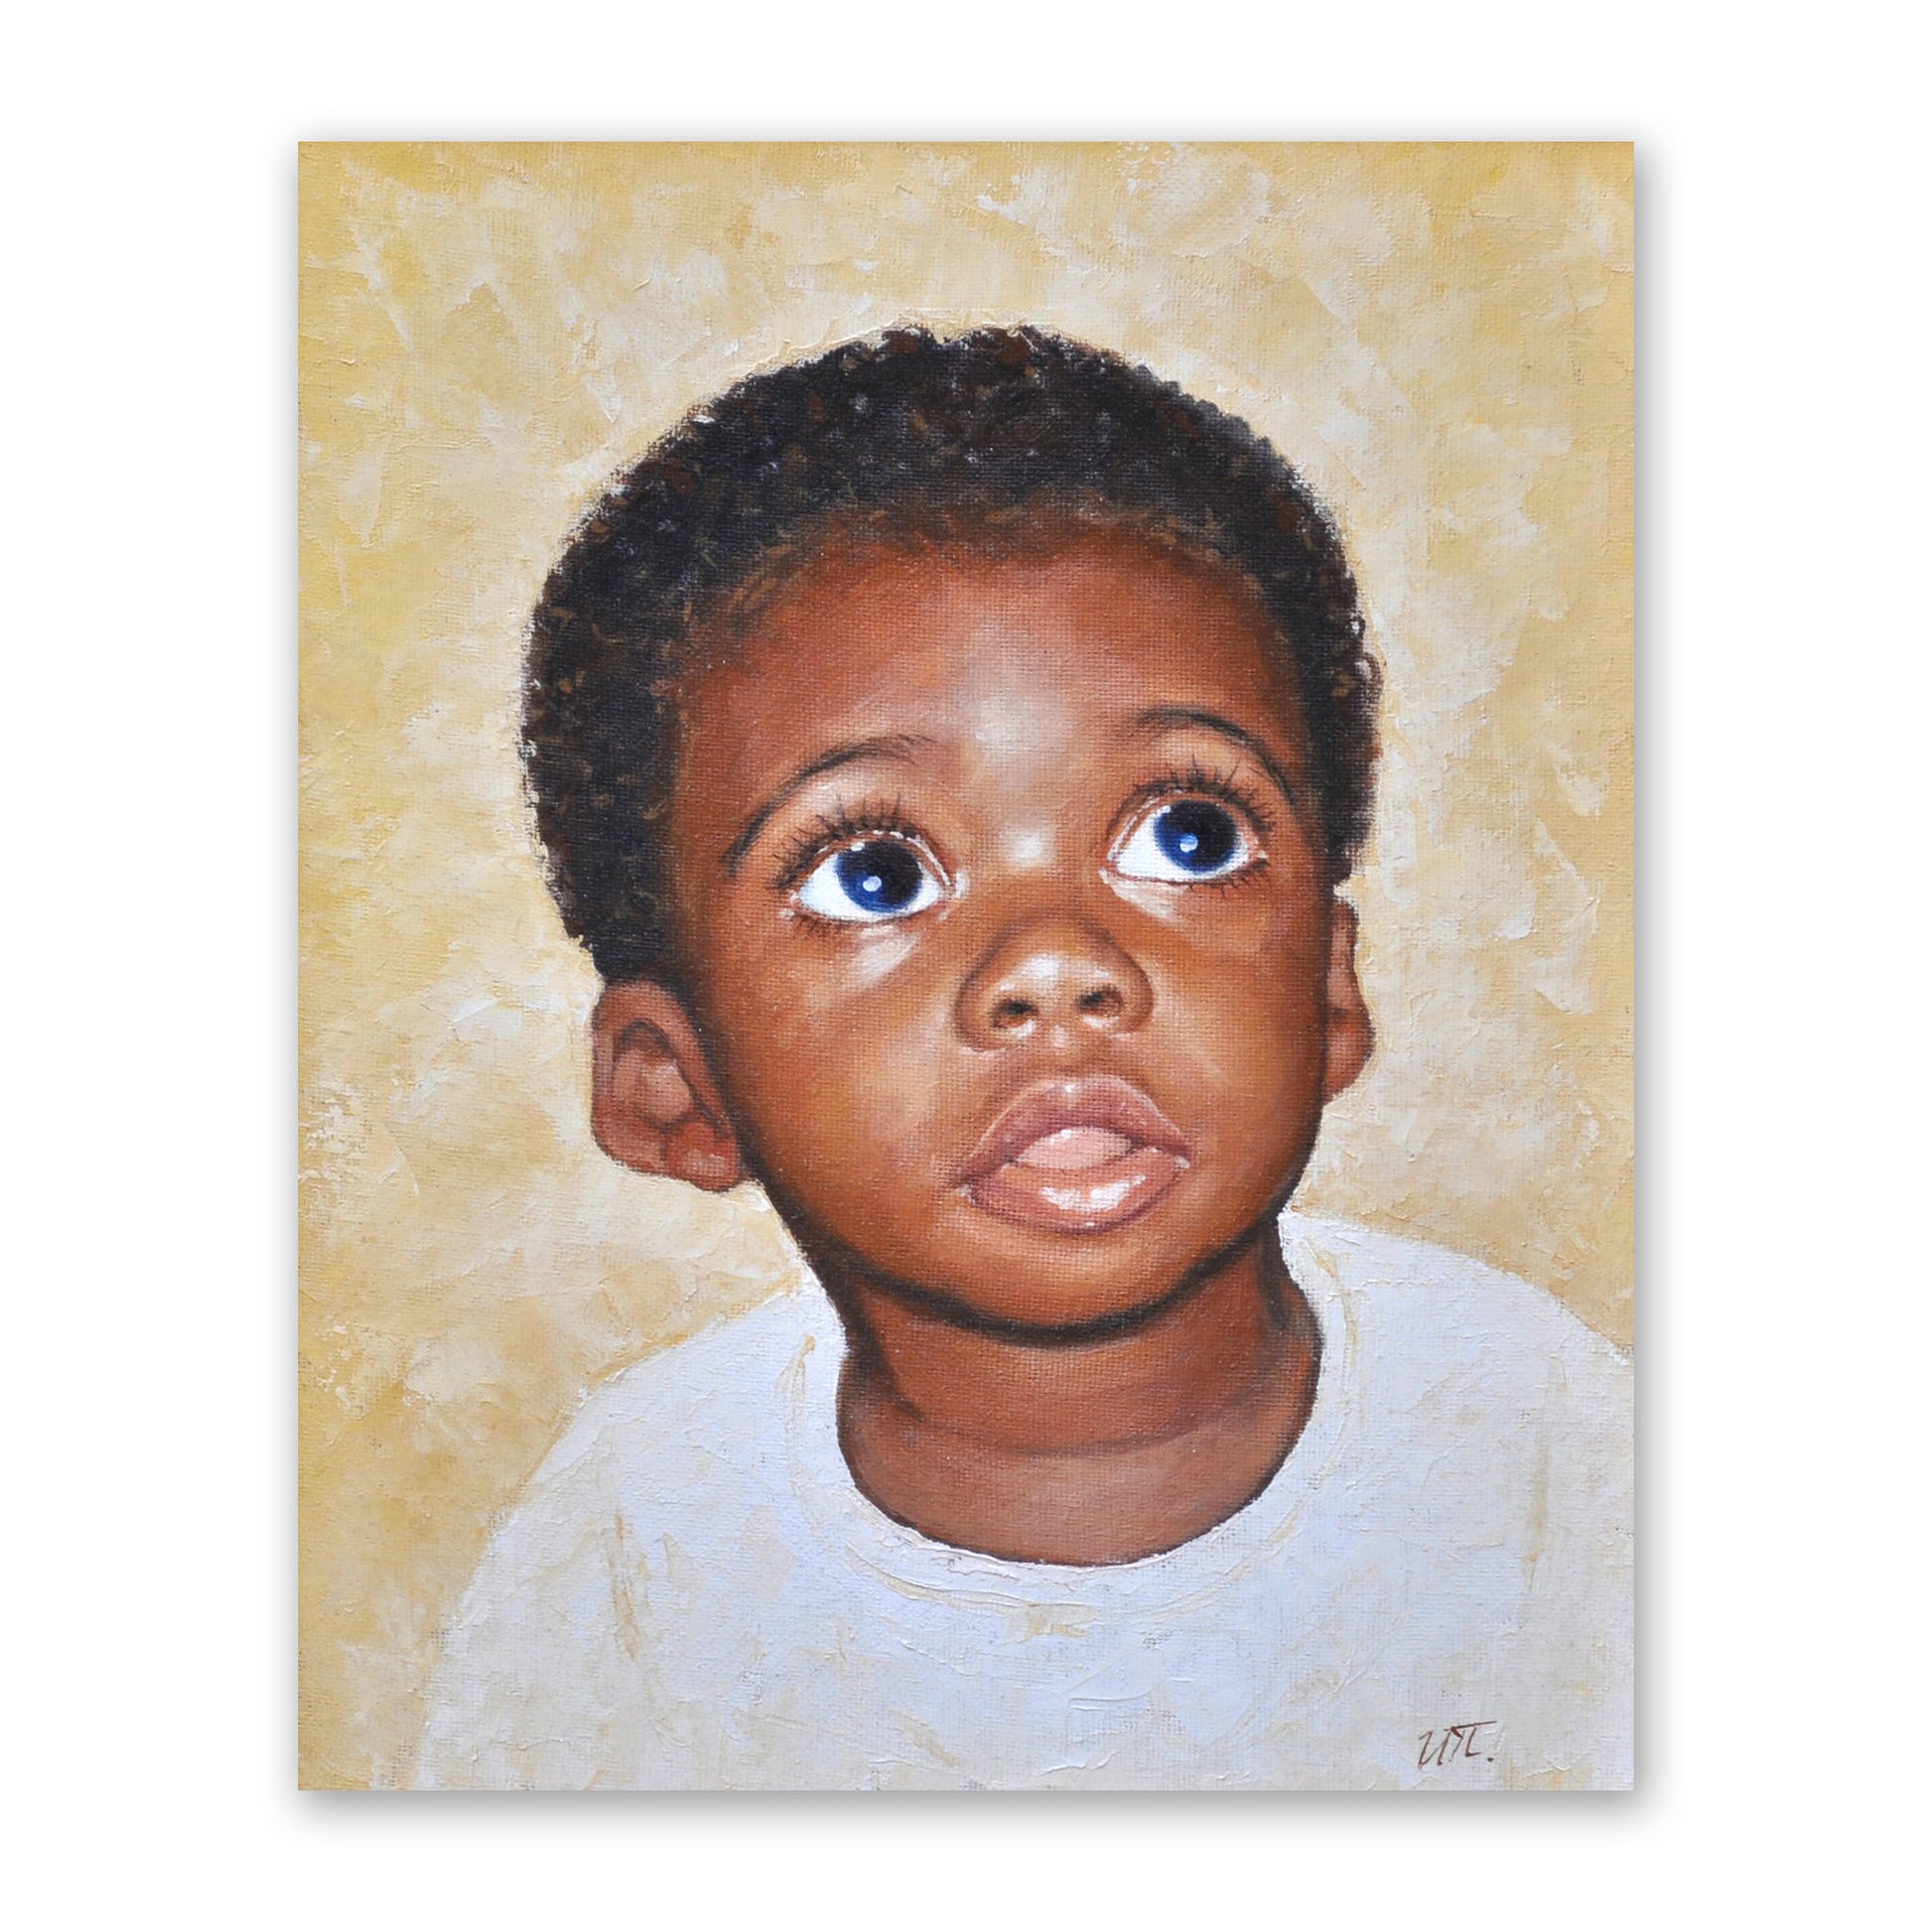 Oil portrait of a child - a little African Black boy with short hair and adorable big round eyes, on a yellow-gold background. The boy is wearing a white shirt. He is looking a bit upward, with an expression of awe and wonder.